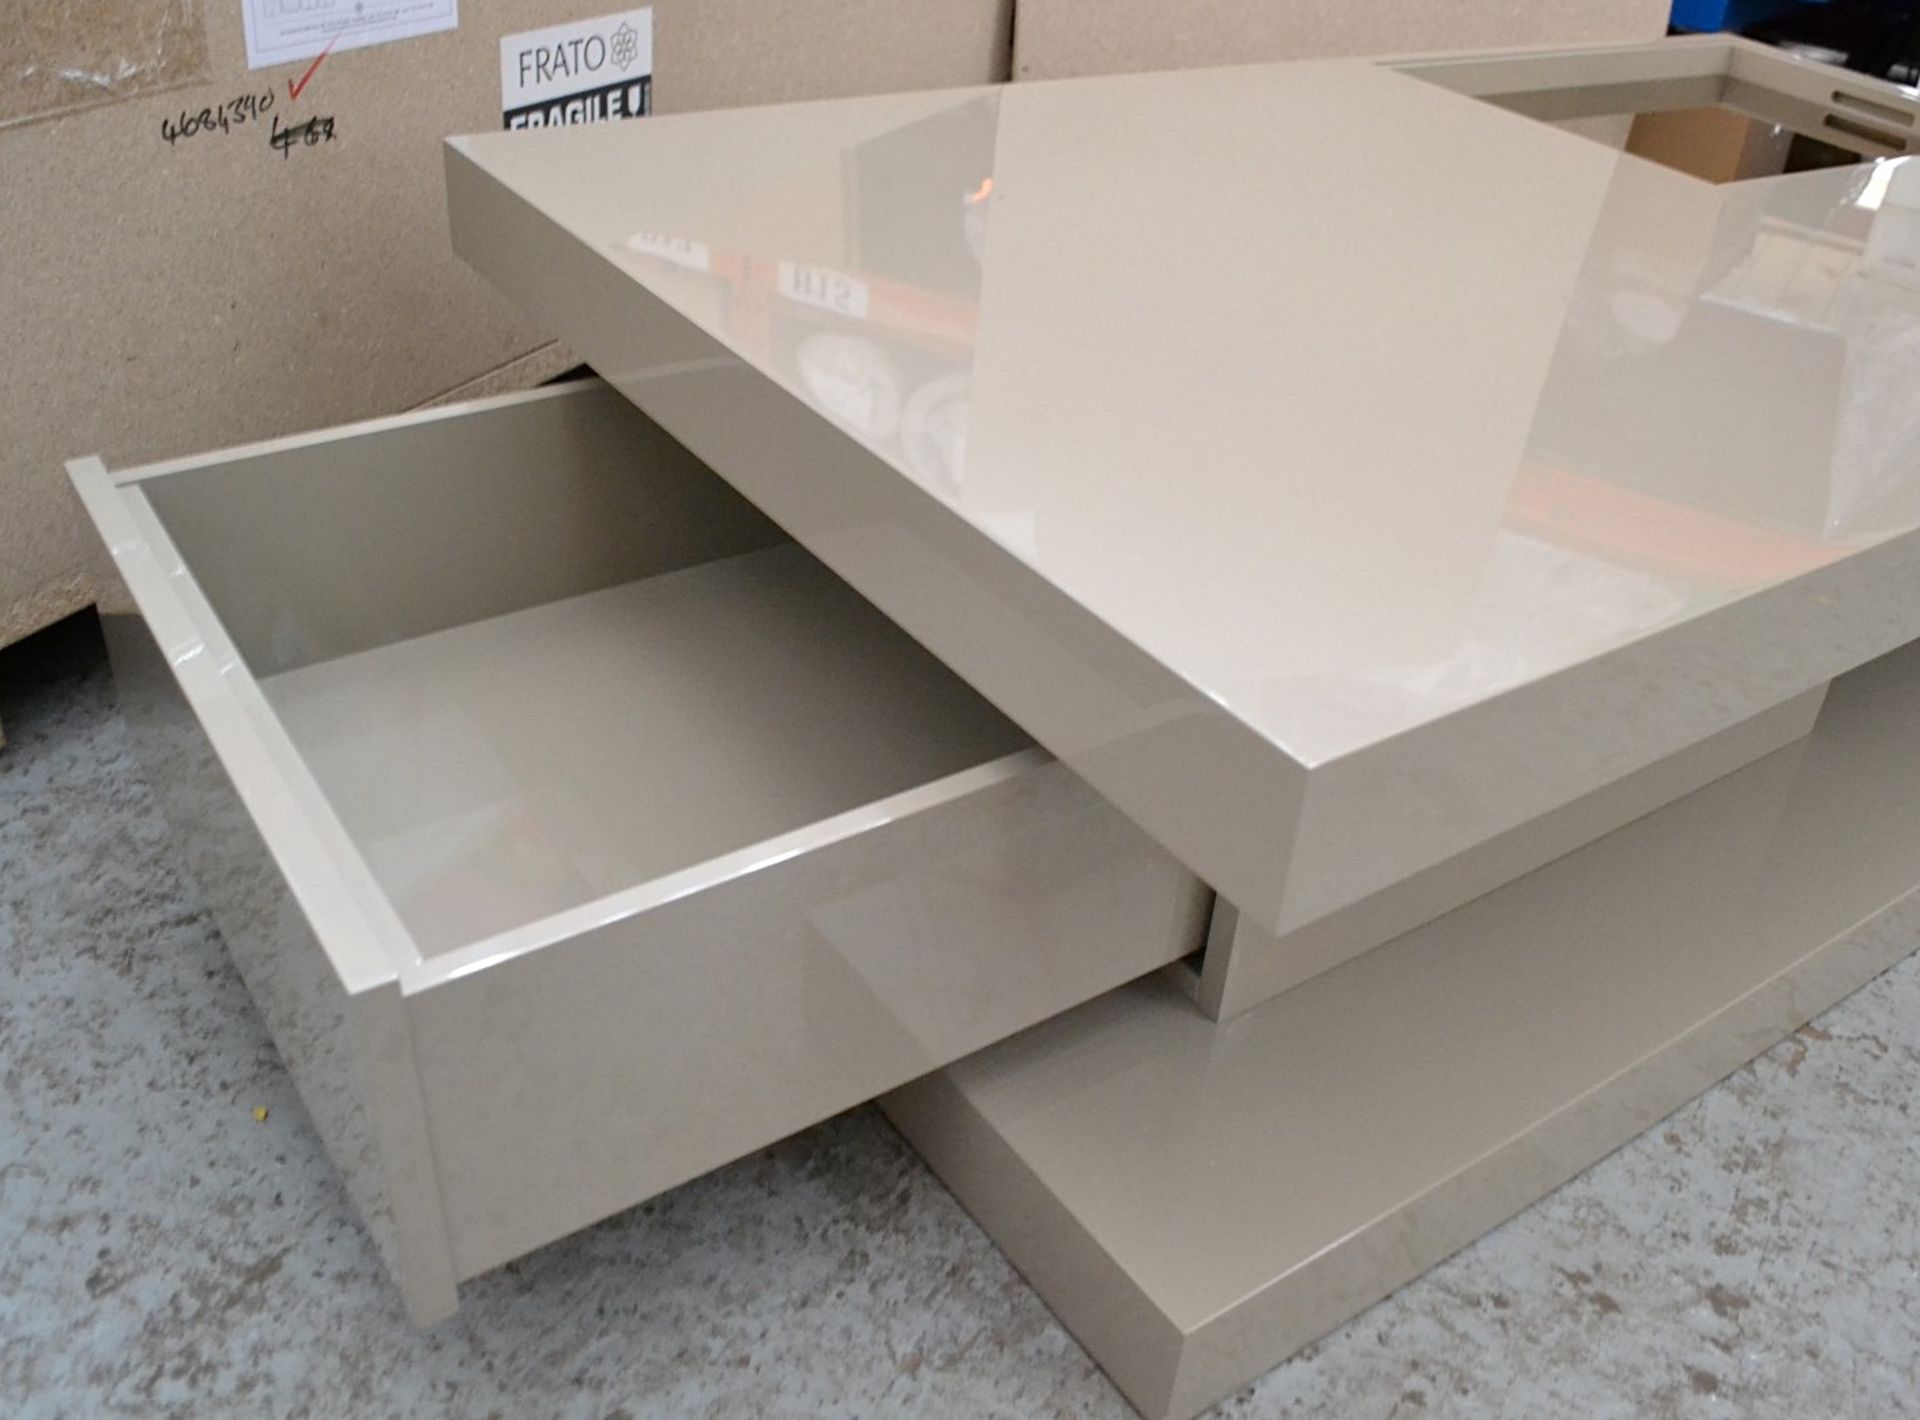 1 x FRATO Saldanha Coffee Table - Features A Push-To-Open Drawer, And Light Grey Lacqured Finish - - Image 3 of 8